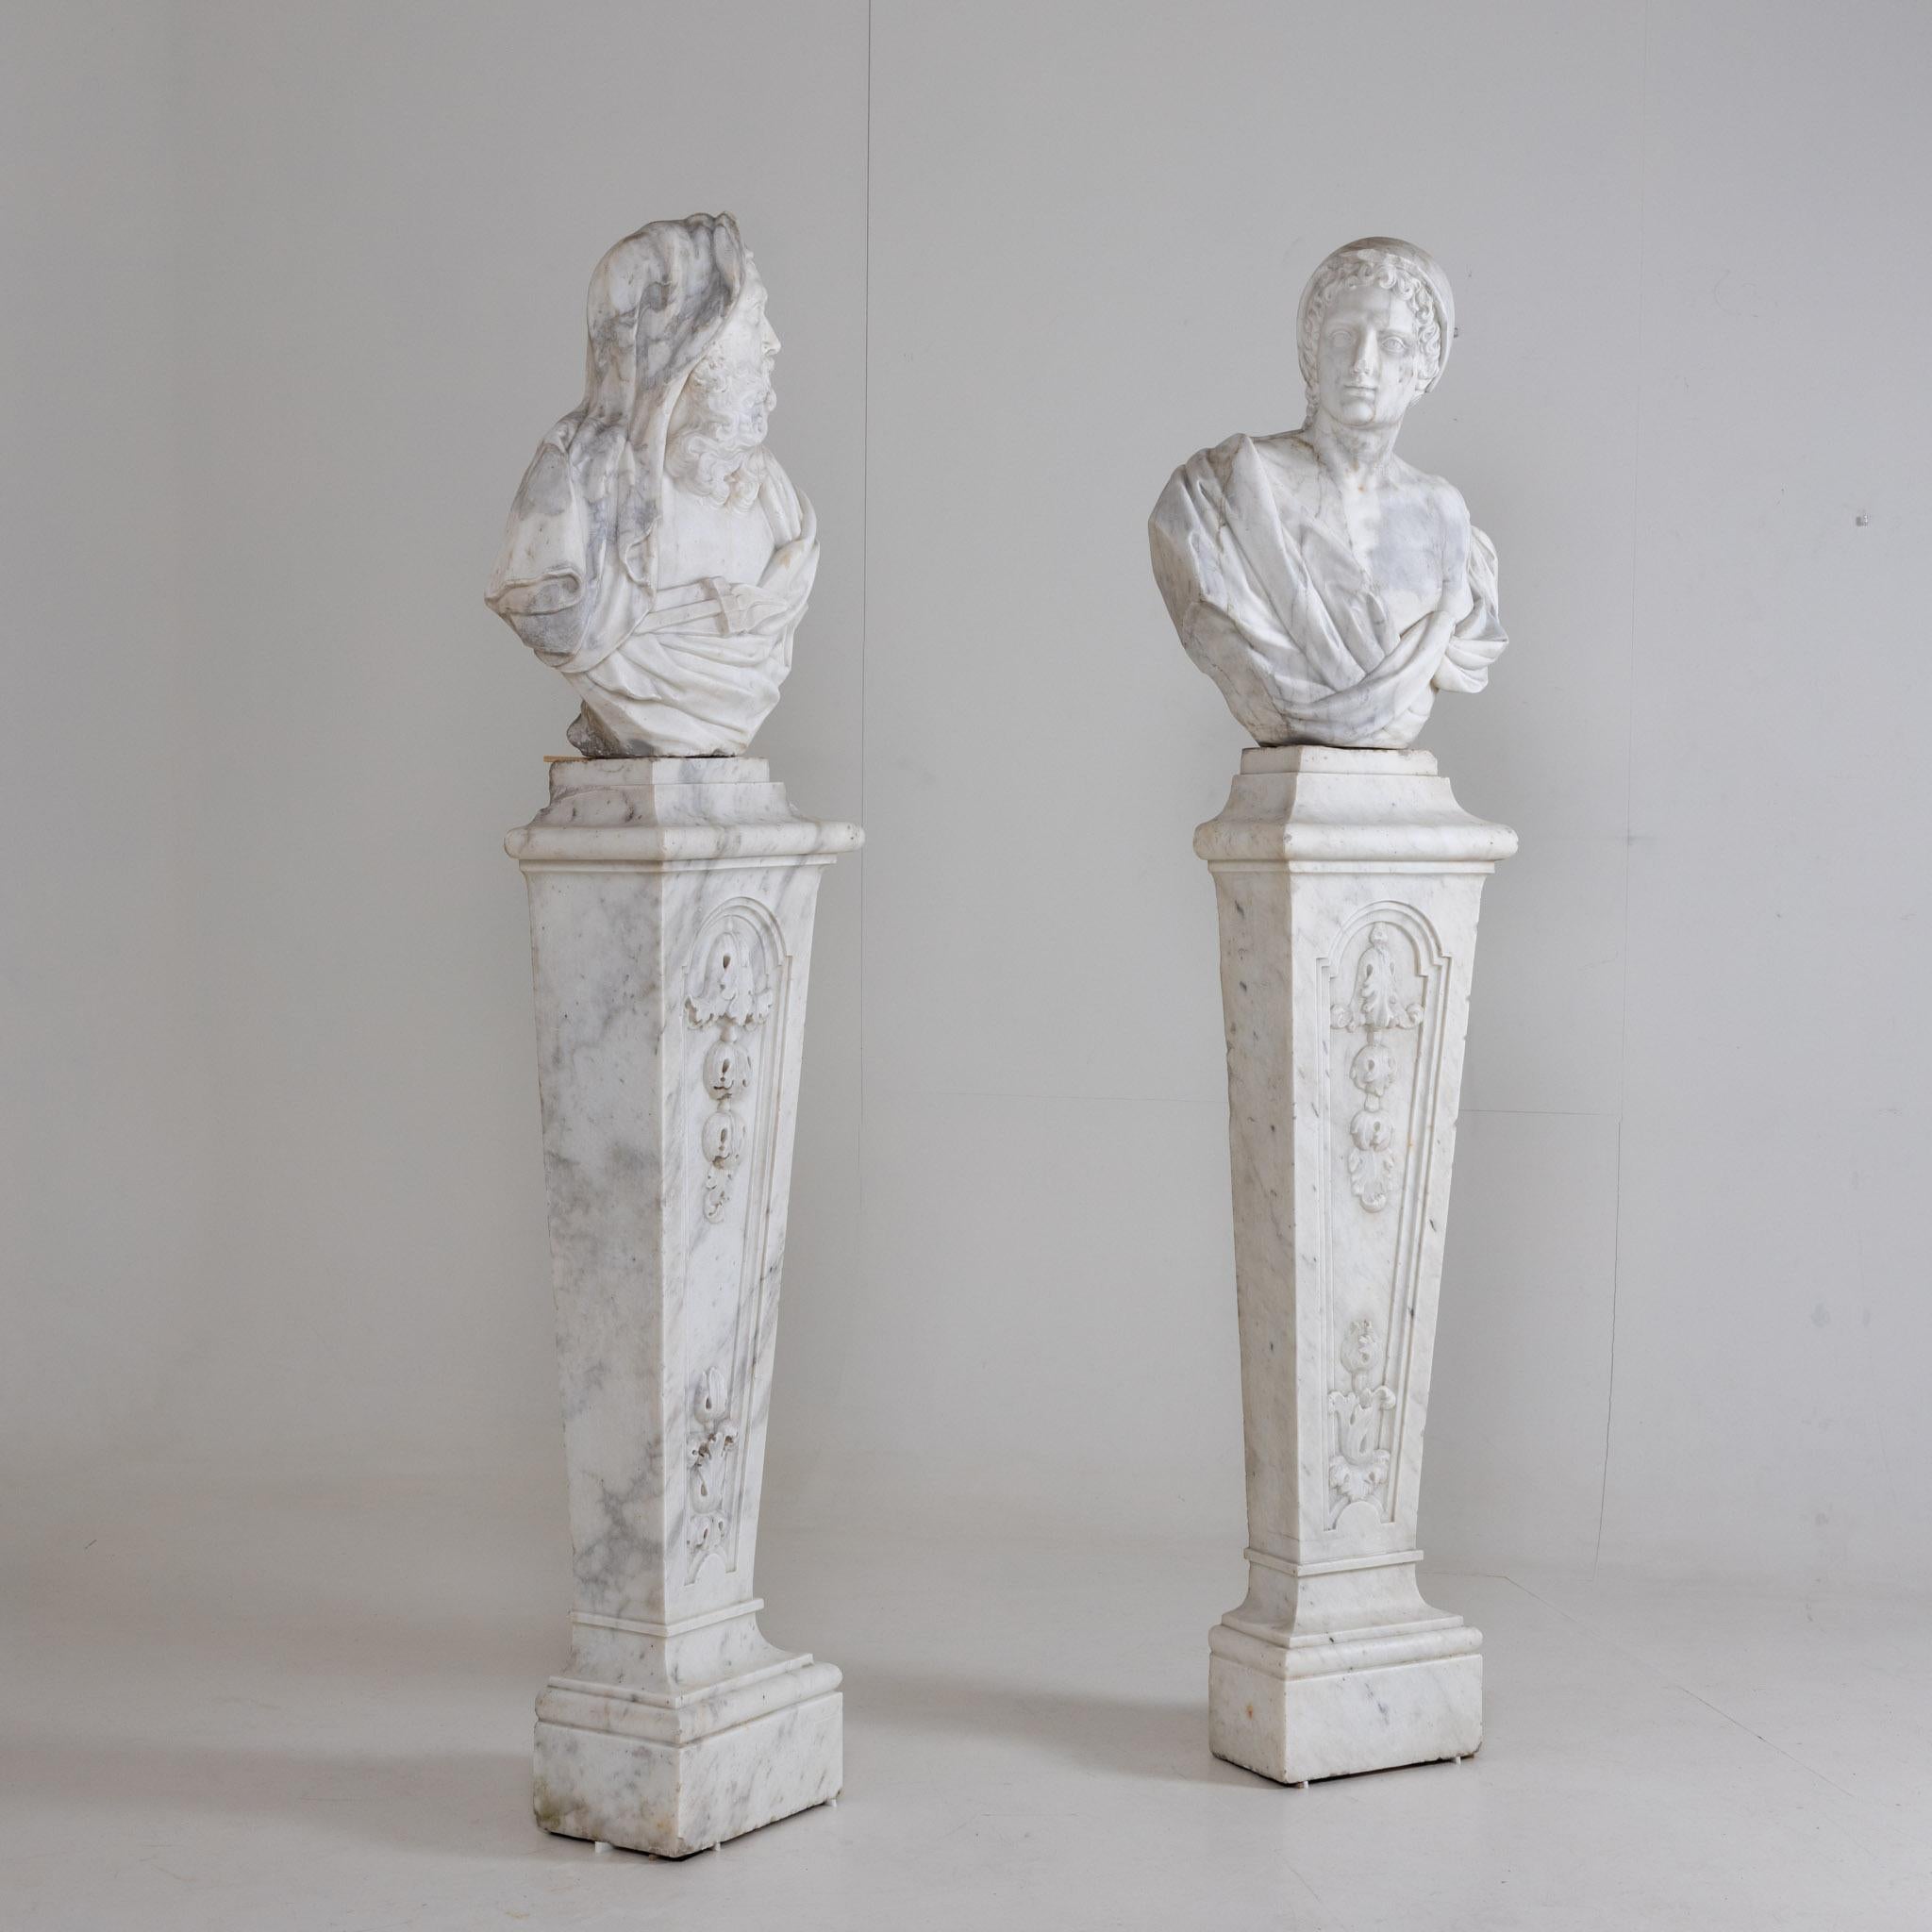 Two life-size, expressive busts of white marble as allegories of winter as an old man with coat and tongs - and - of spring as a youth with cap, on conical stelae with leaf ornaments.
Provenance: formerly in the courtyard of the Merode-Houffalice